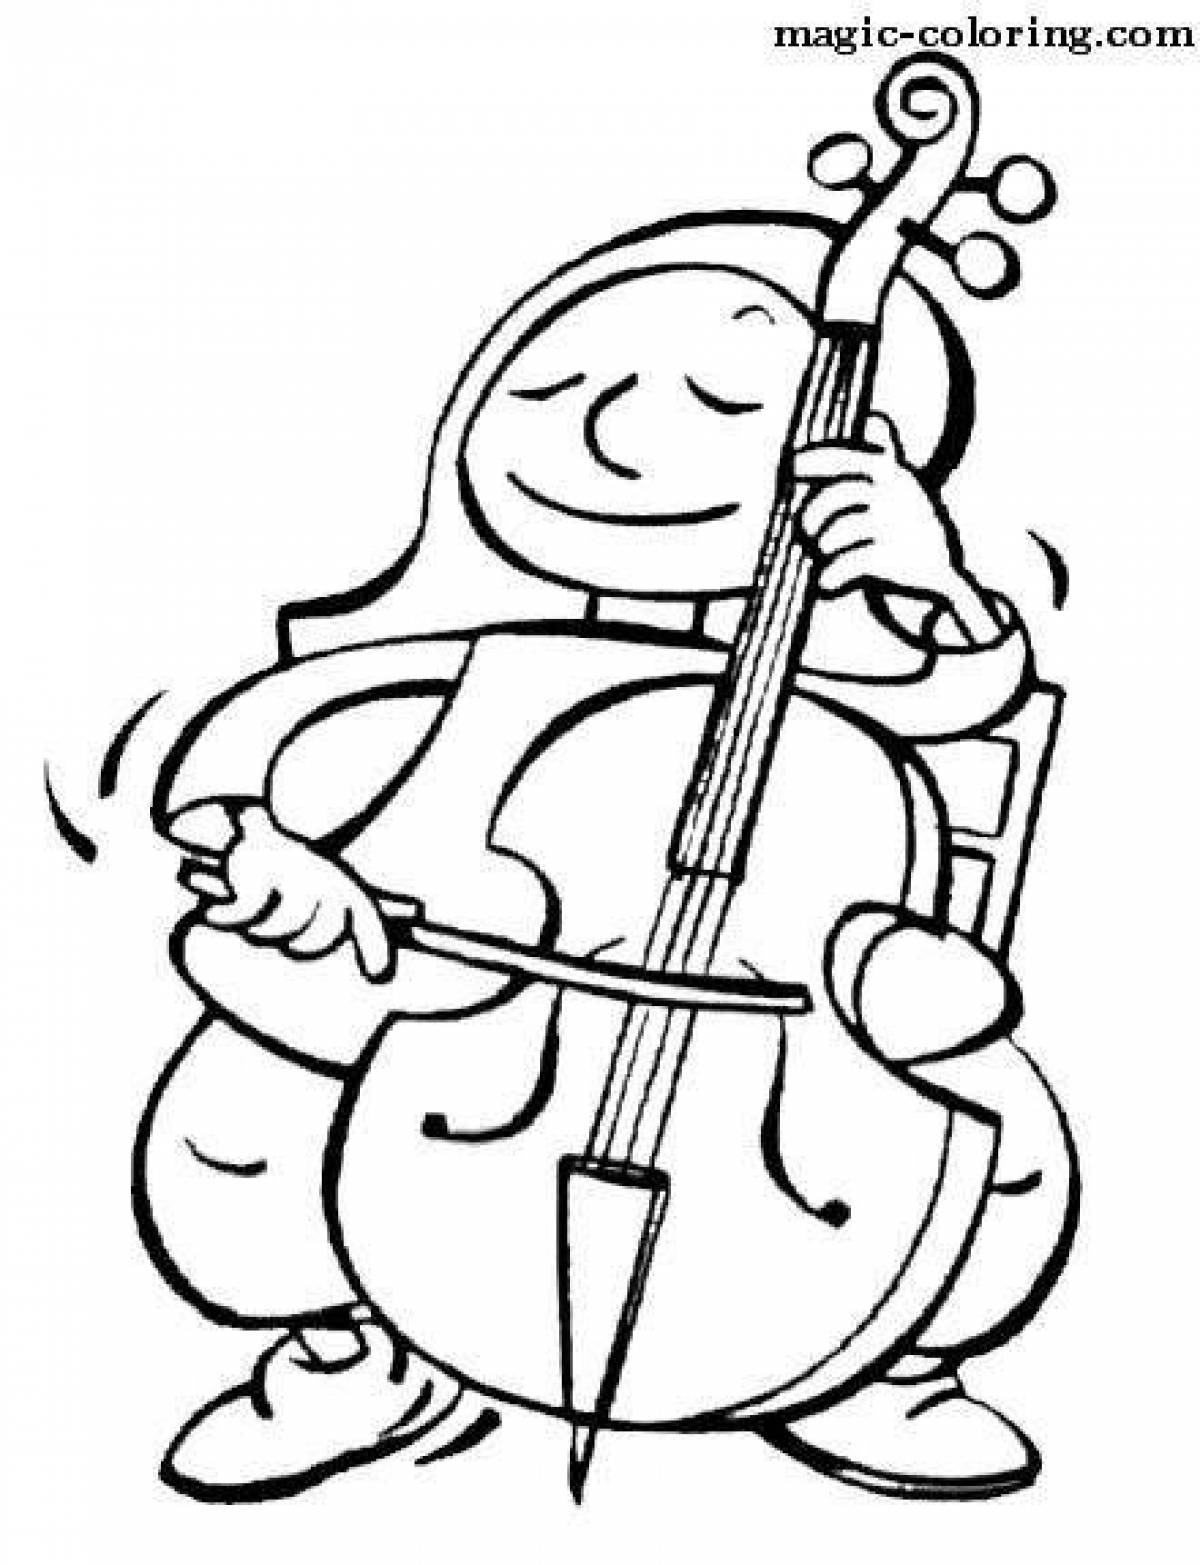 Awesome cello coloring page